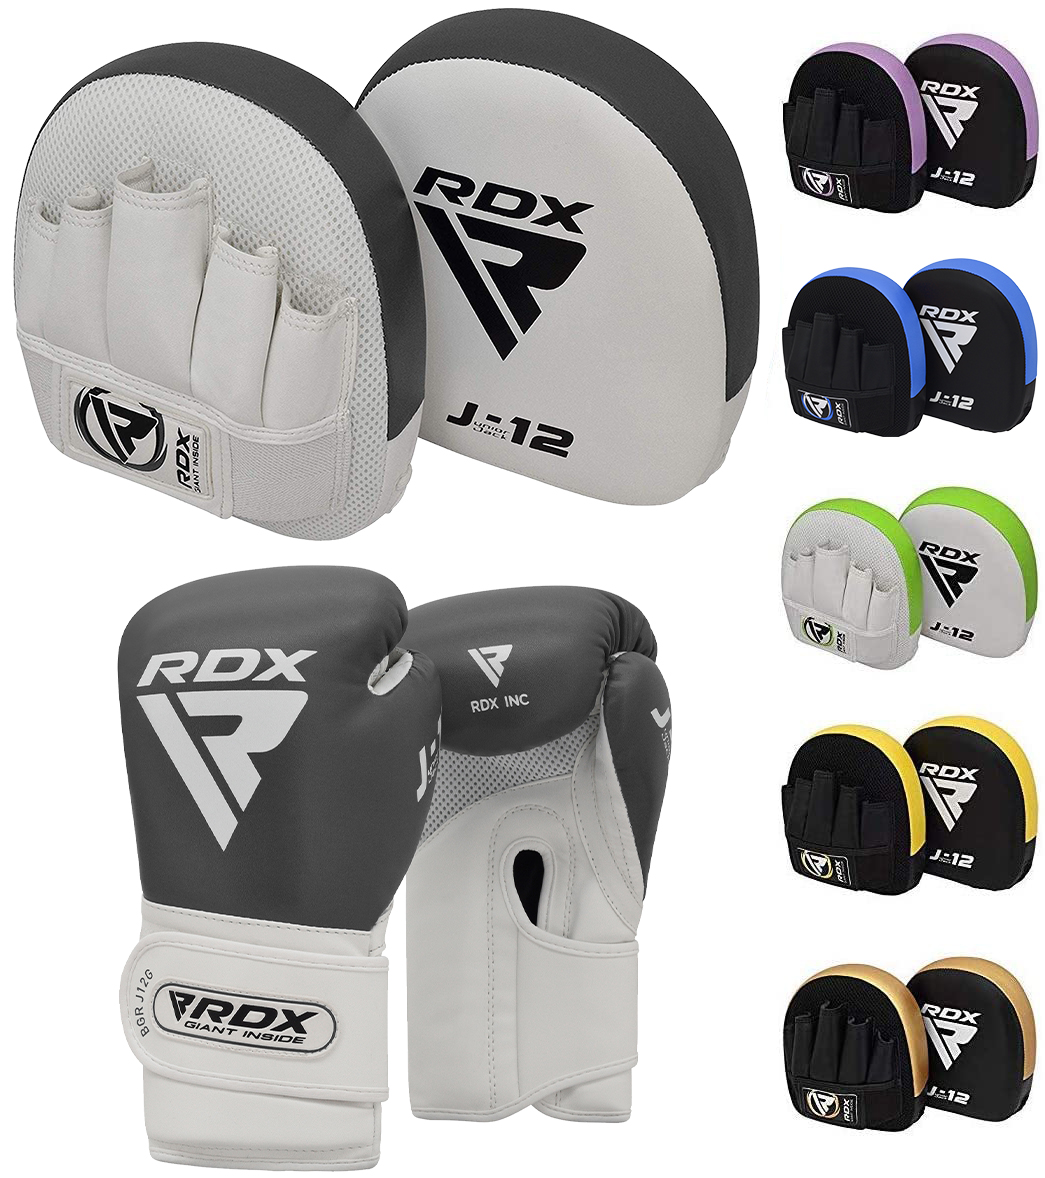 Youth Hook and Jab Target Focus Mitts with Punching Gloves Junior Hand Shield for MMA Muay Thai Martial Arts RDX Kids Boxing Pads and Gloves Set Boxercise Karate and Kickboxing Training 